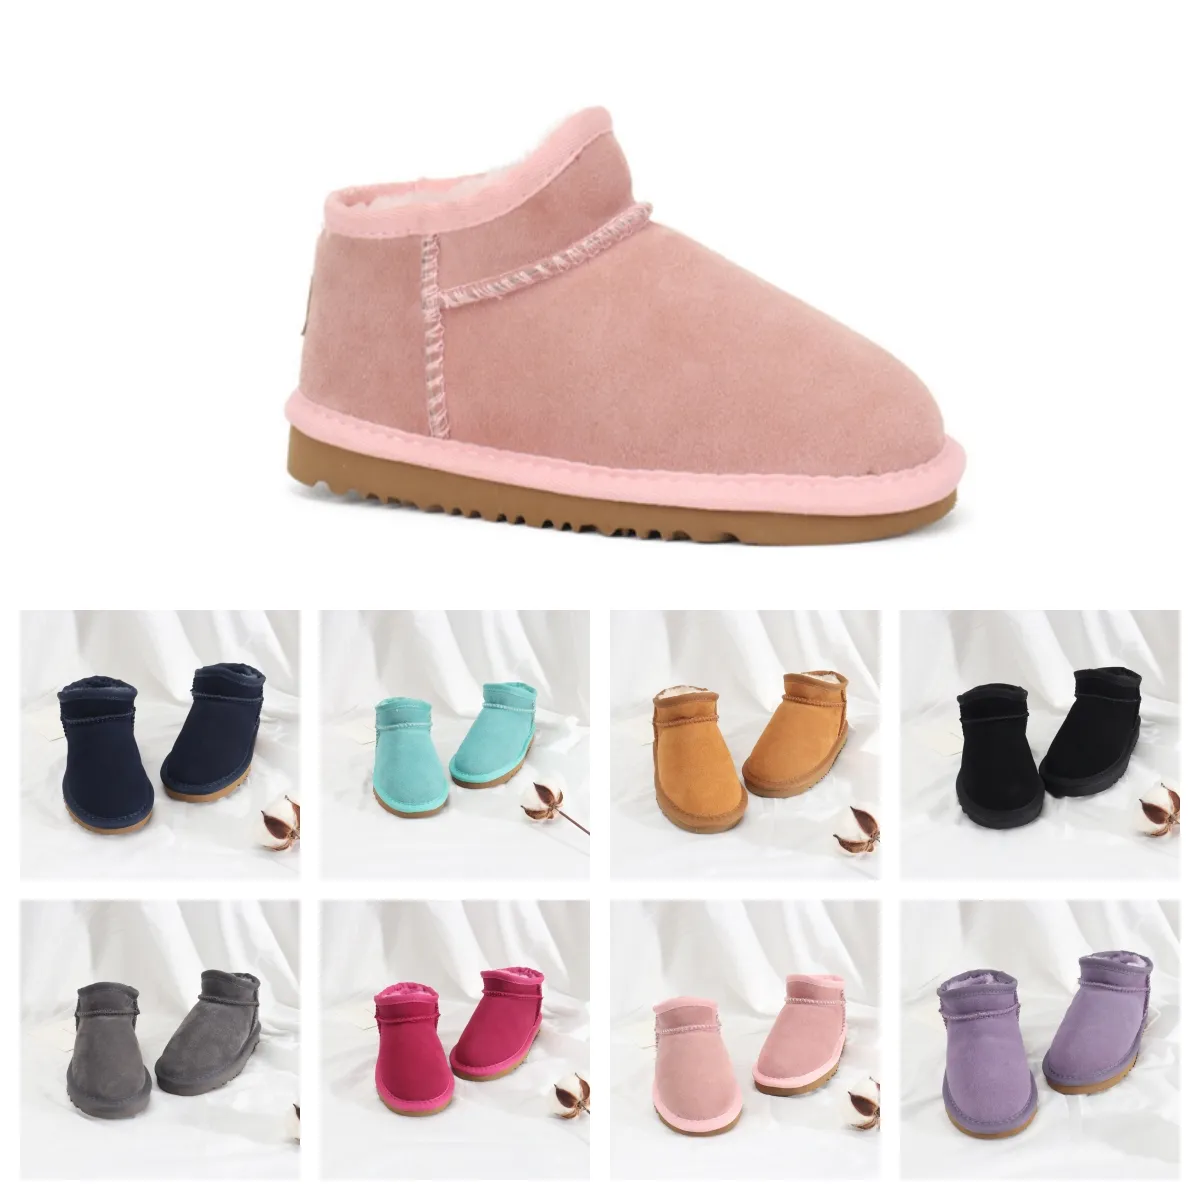 Australia Kids boots winter snow boot Classic Ultra Mini Boot Children shoes Botton baby boys girls Ankle booties kid Suede shearling warm